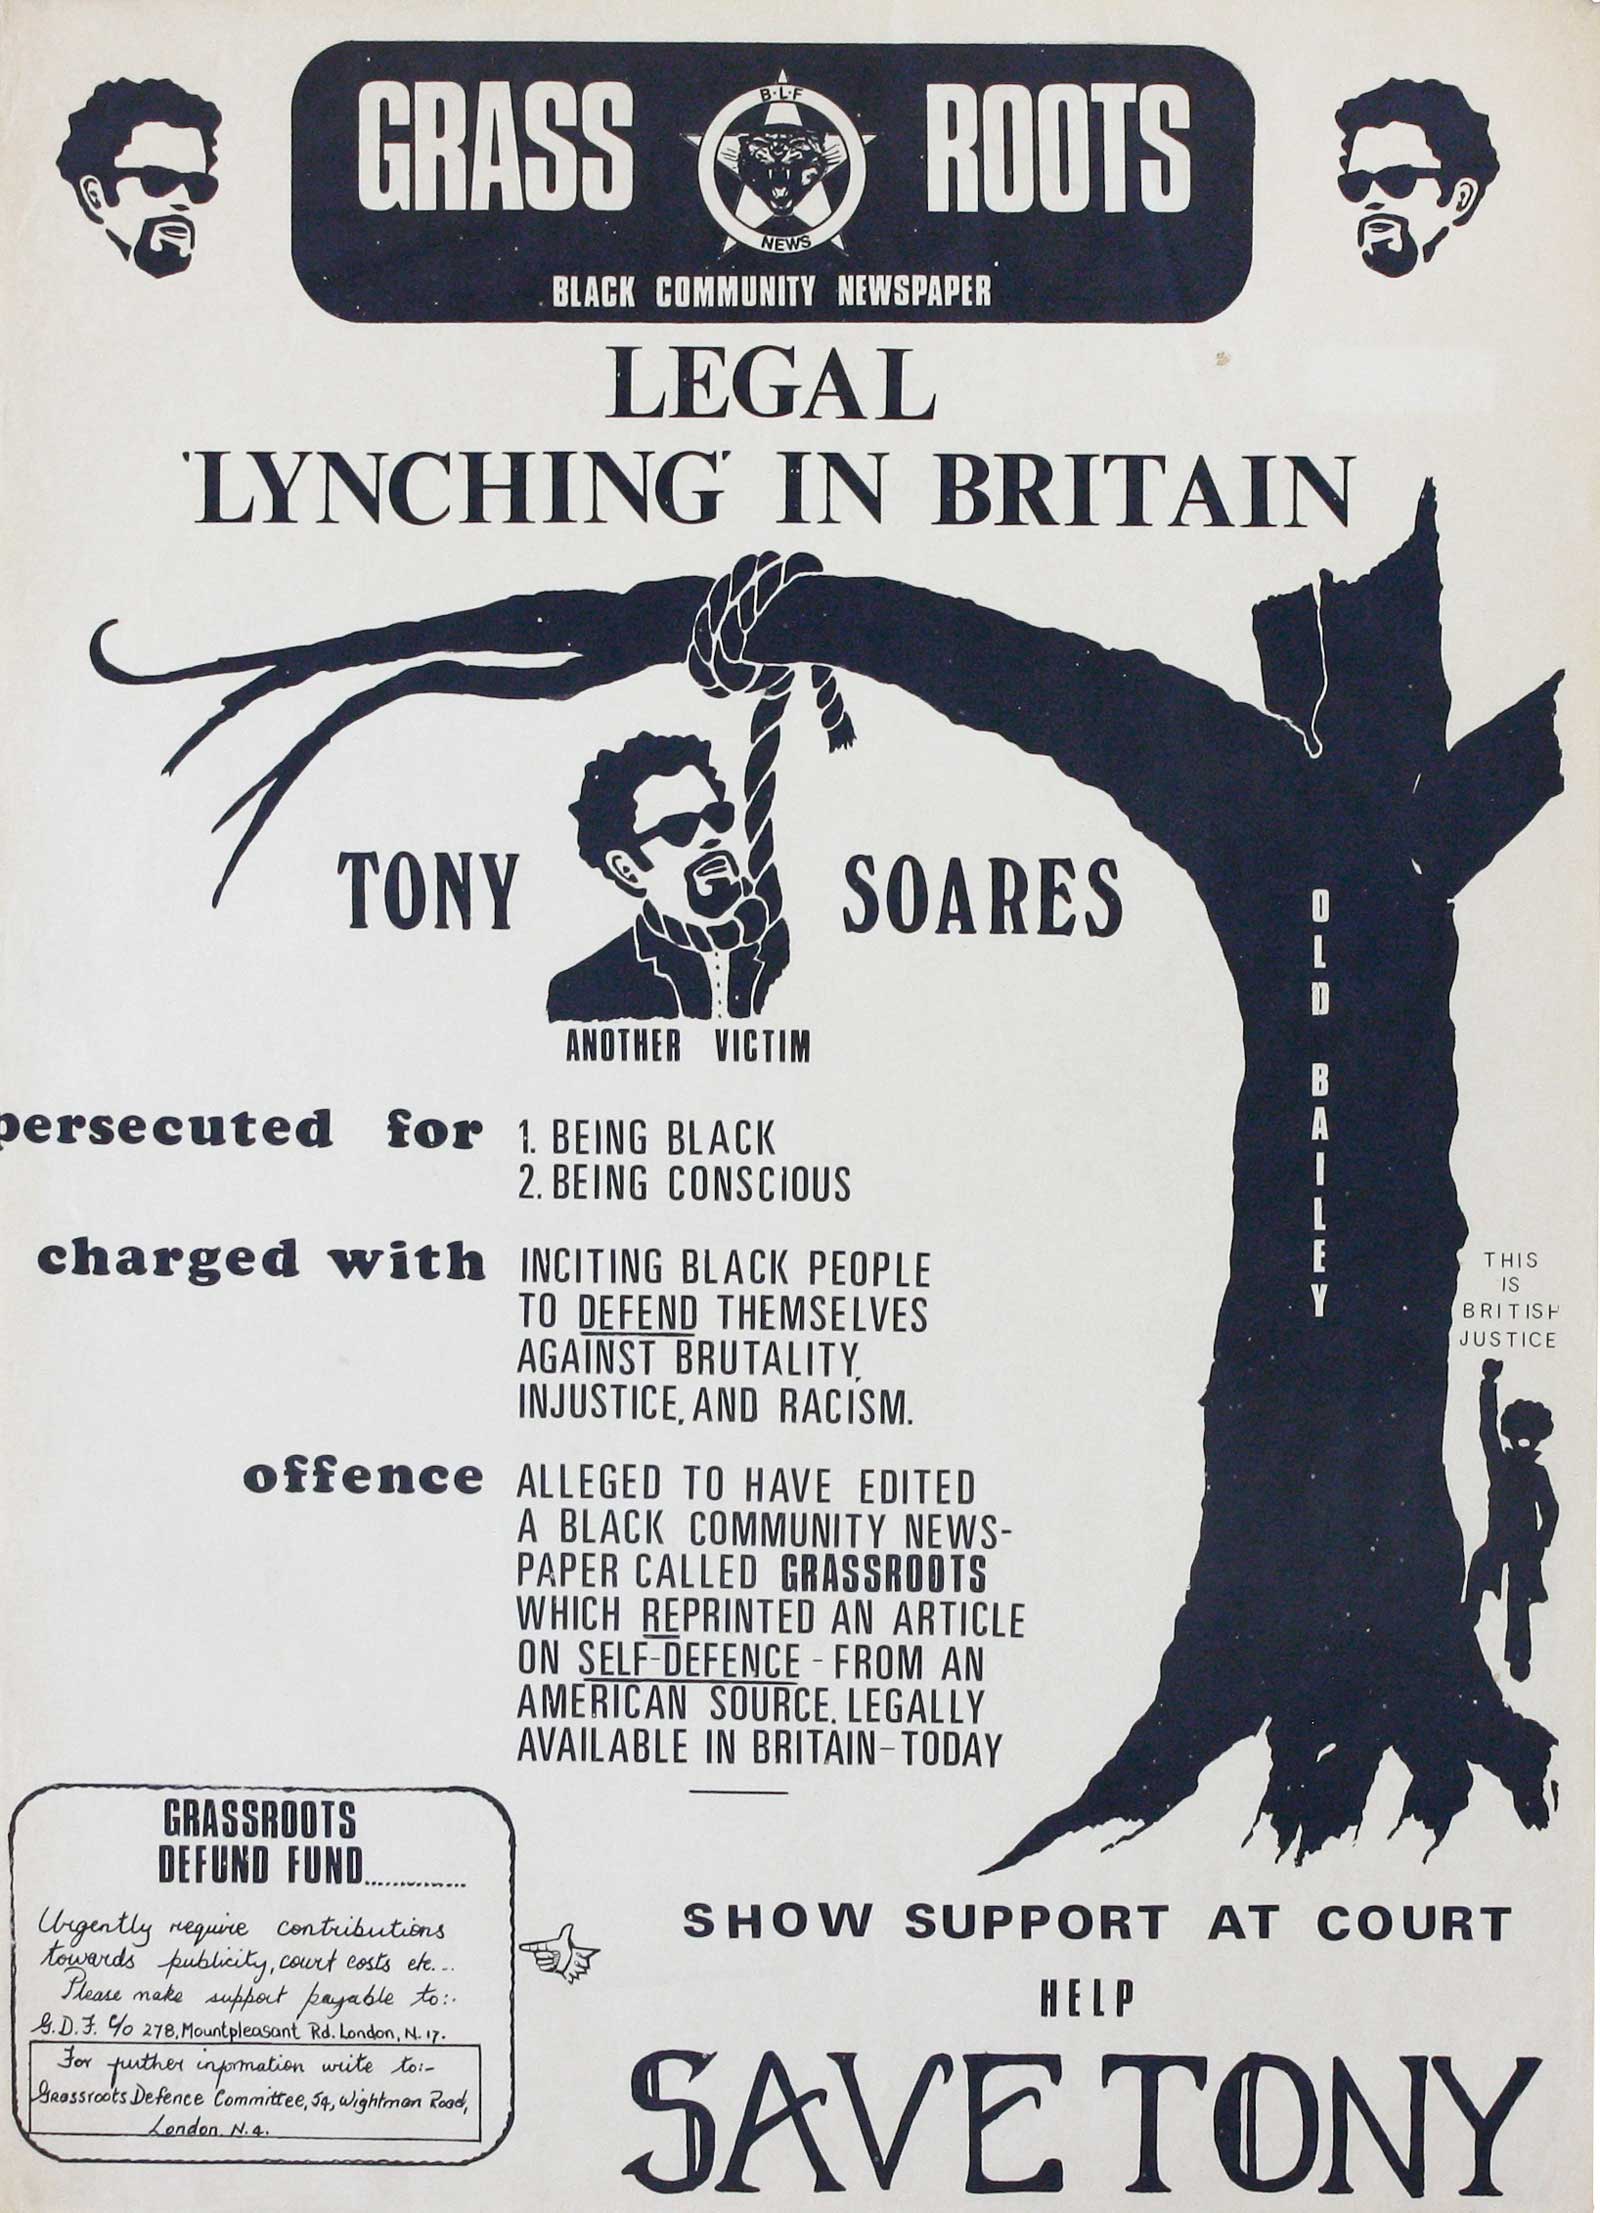 Broadside in support of Tony Soares, 1972. Soares, a founding member of the Black Liberation Front and editor of its publication <em>Grass Roots</em>, was arrested on 9 March 1972 after reprinting an article from the US Black Panthers newspaper that included instructions for making Molotov cocktails. He was found guilty on 21 March 1973 and sentenced to community service.